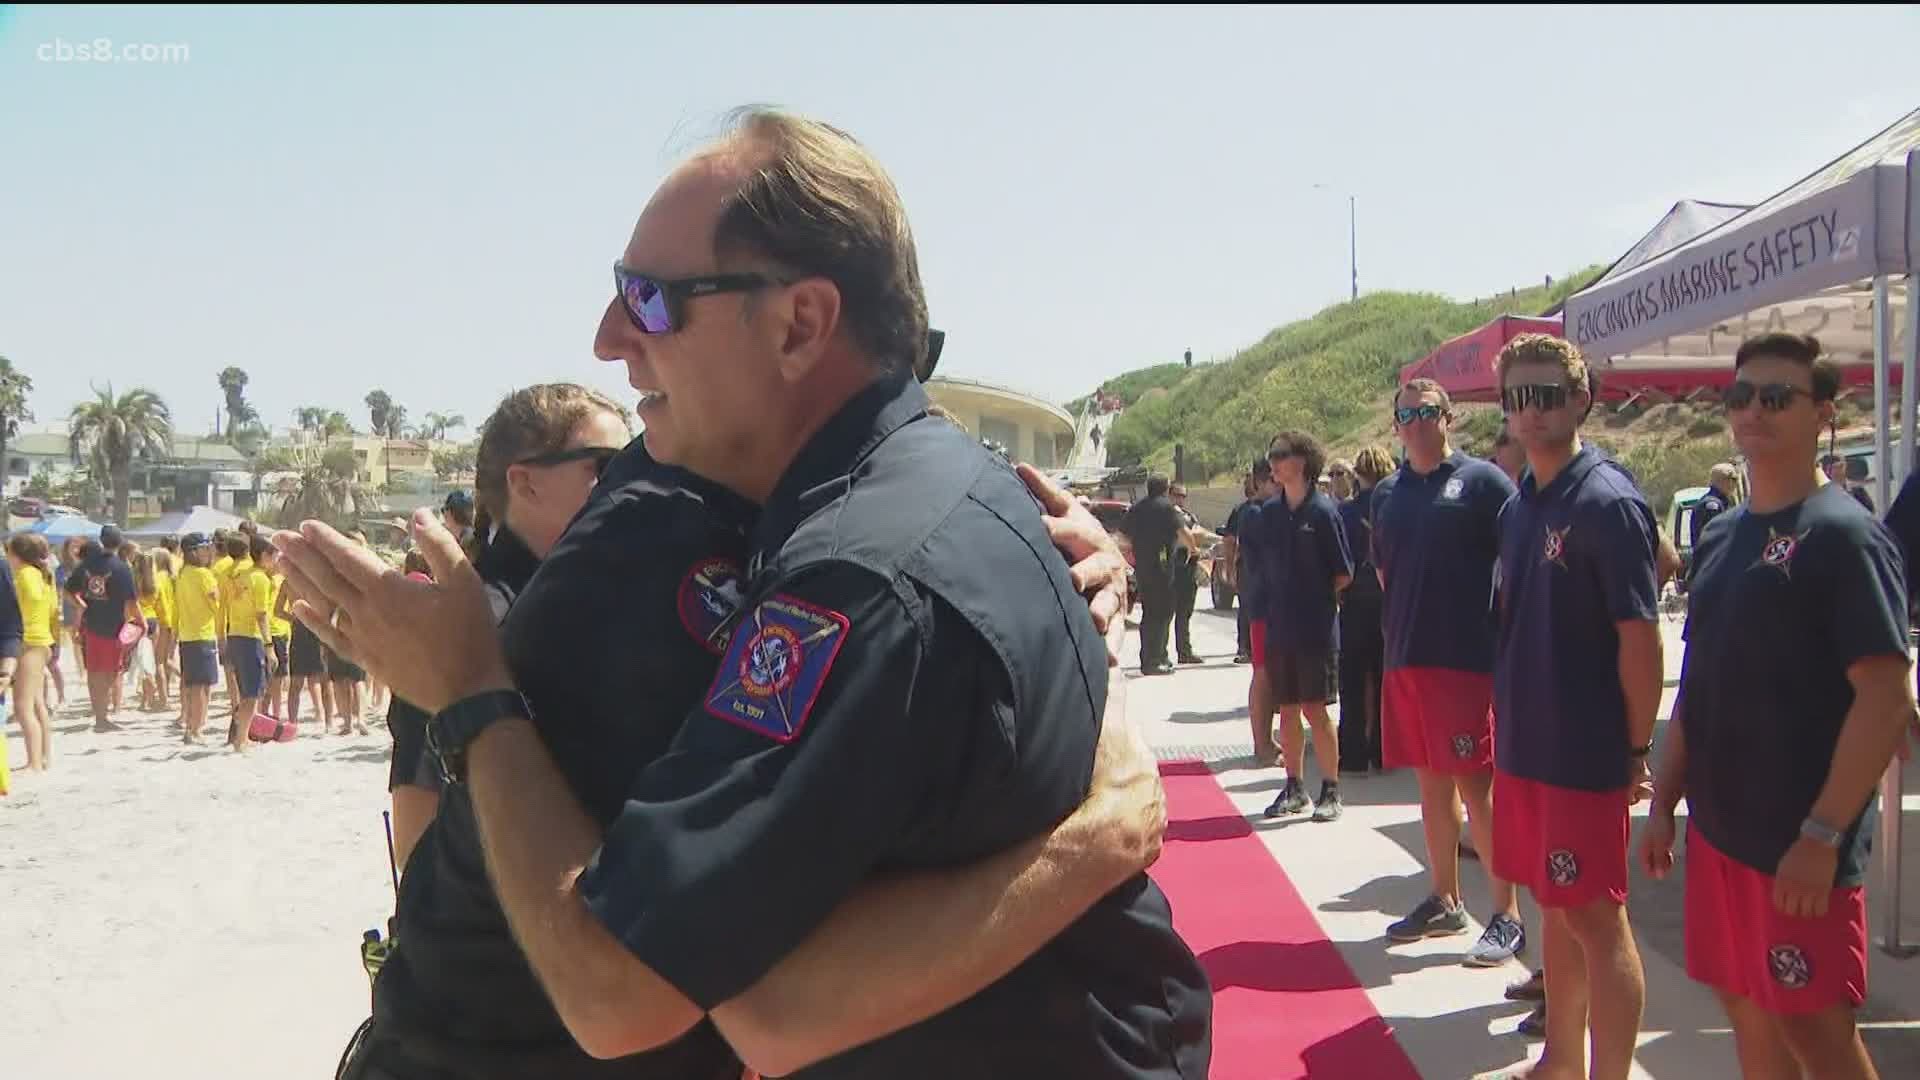 It was a happy, yet emotional day, and during the heartfelt ceremony, Larry’s friends and colleagues shared their thoughts about this lifeguard legend.